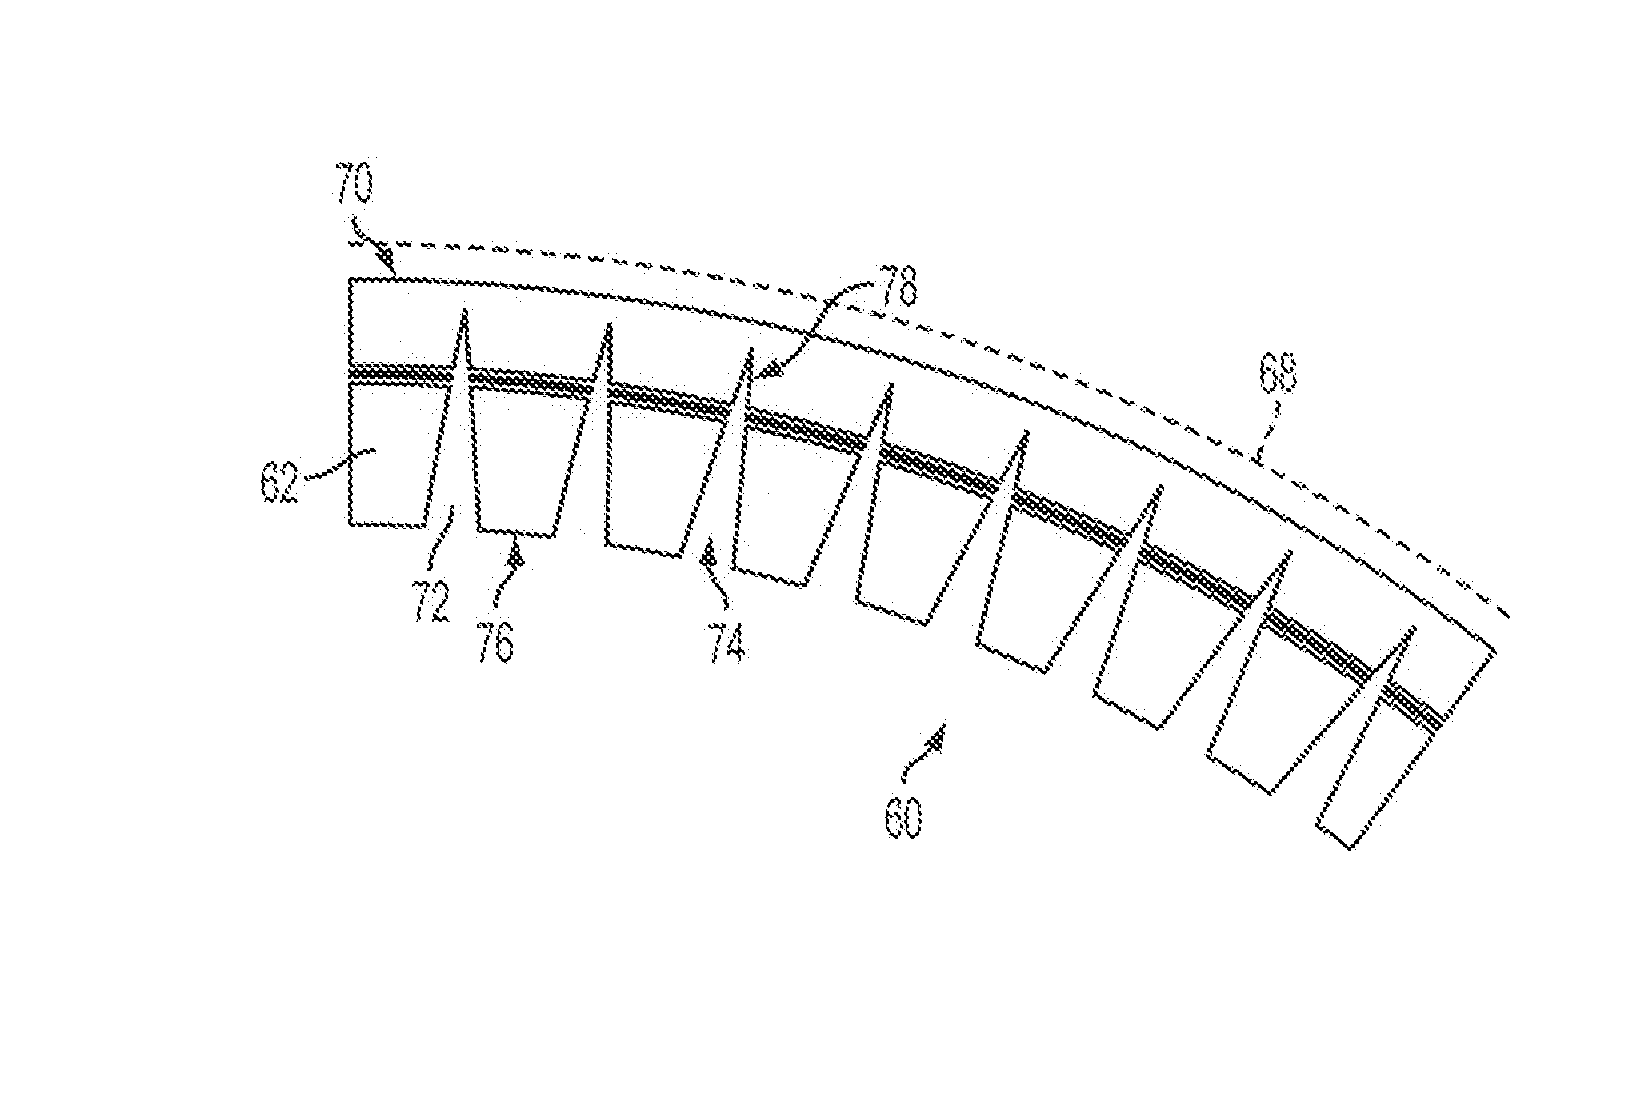 Core for a composite structure and method of fabrication thereof